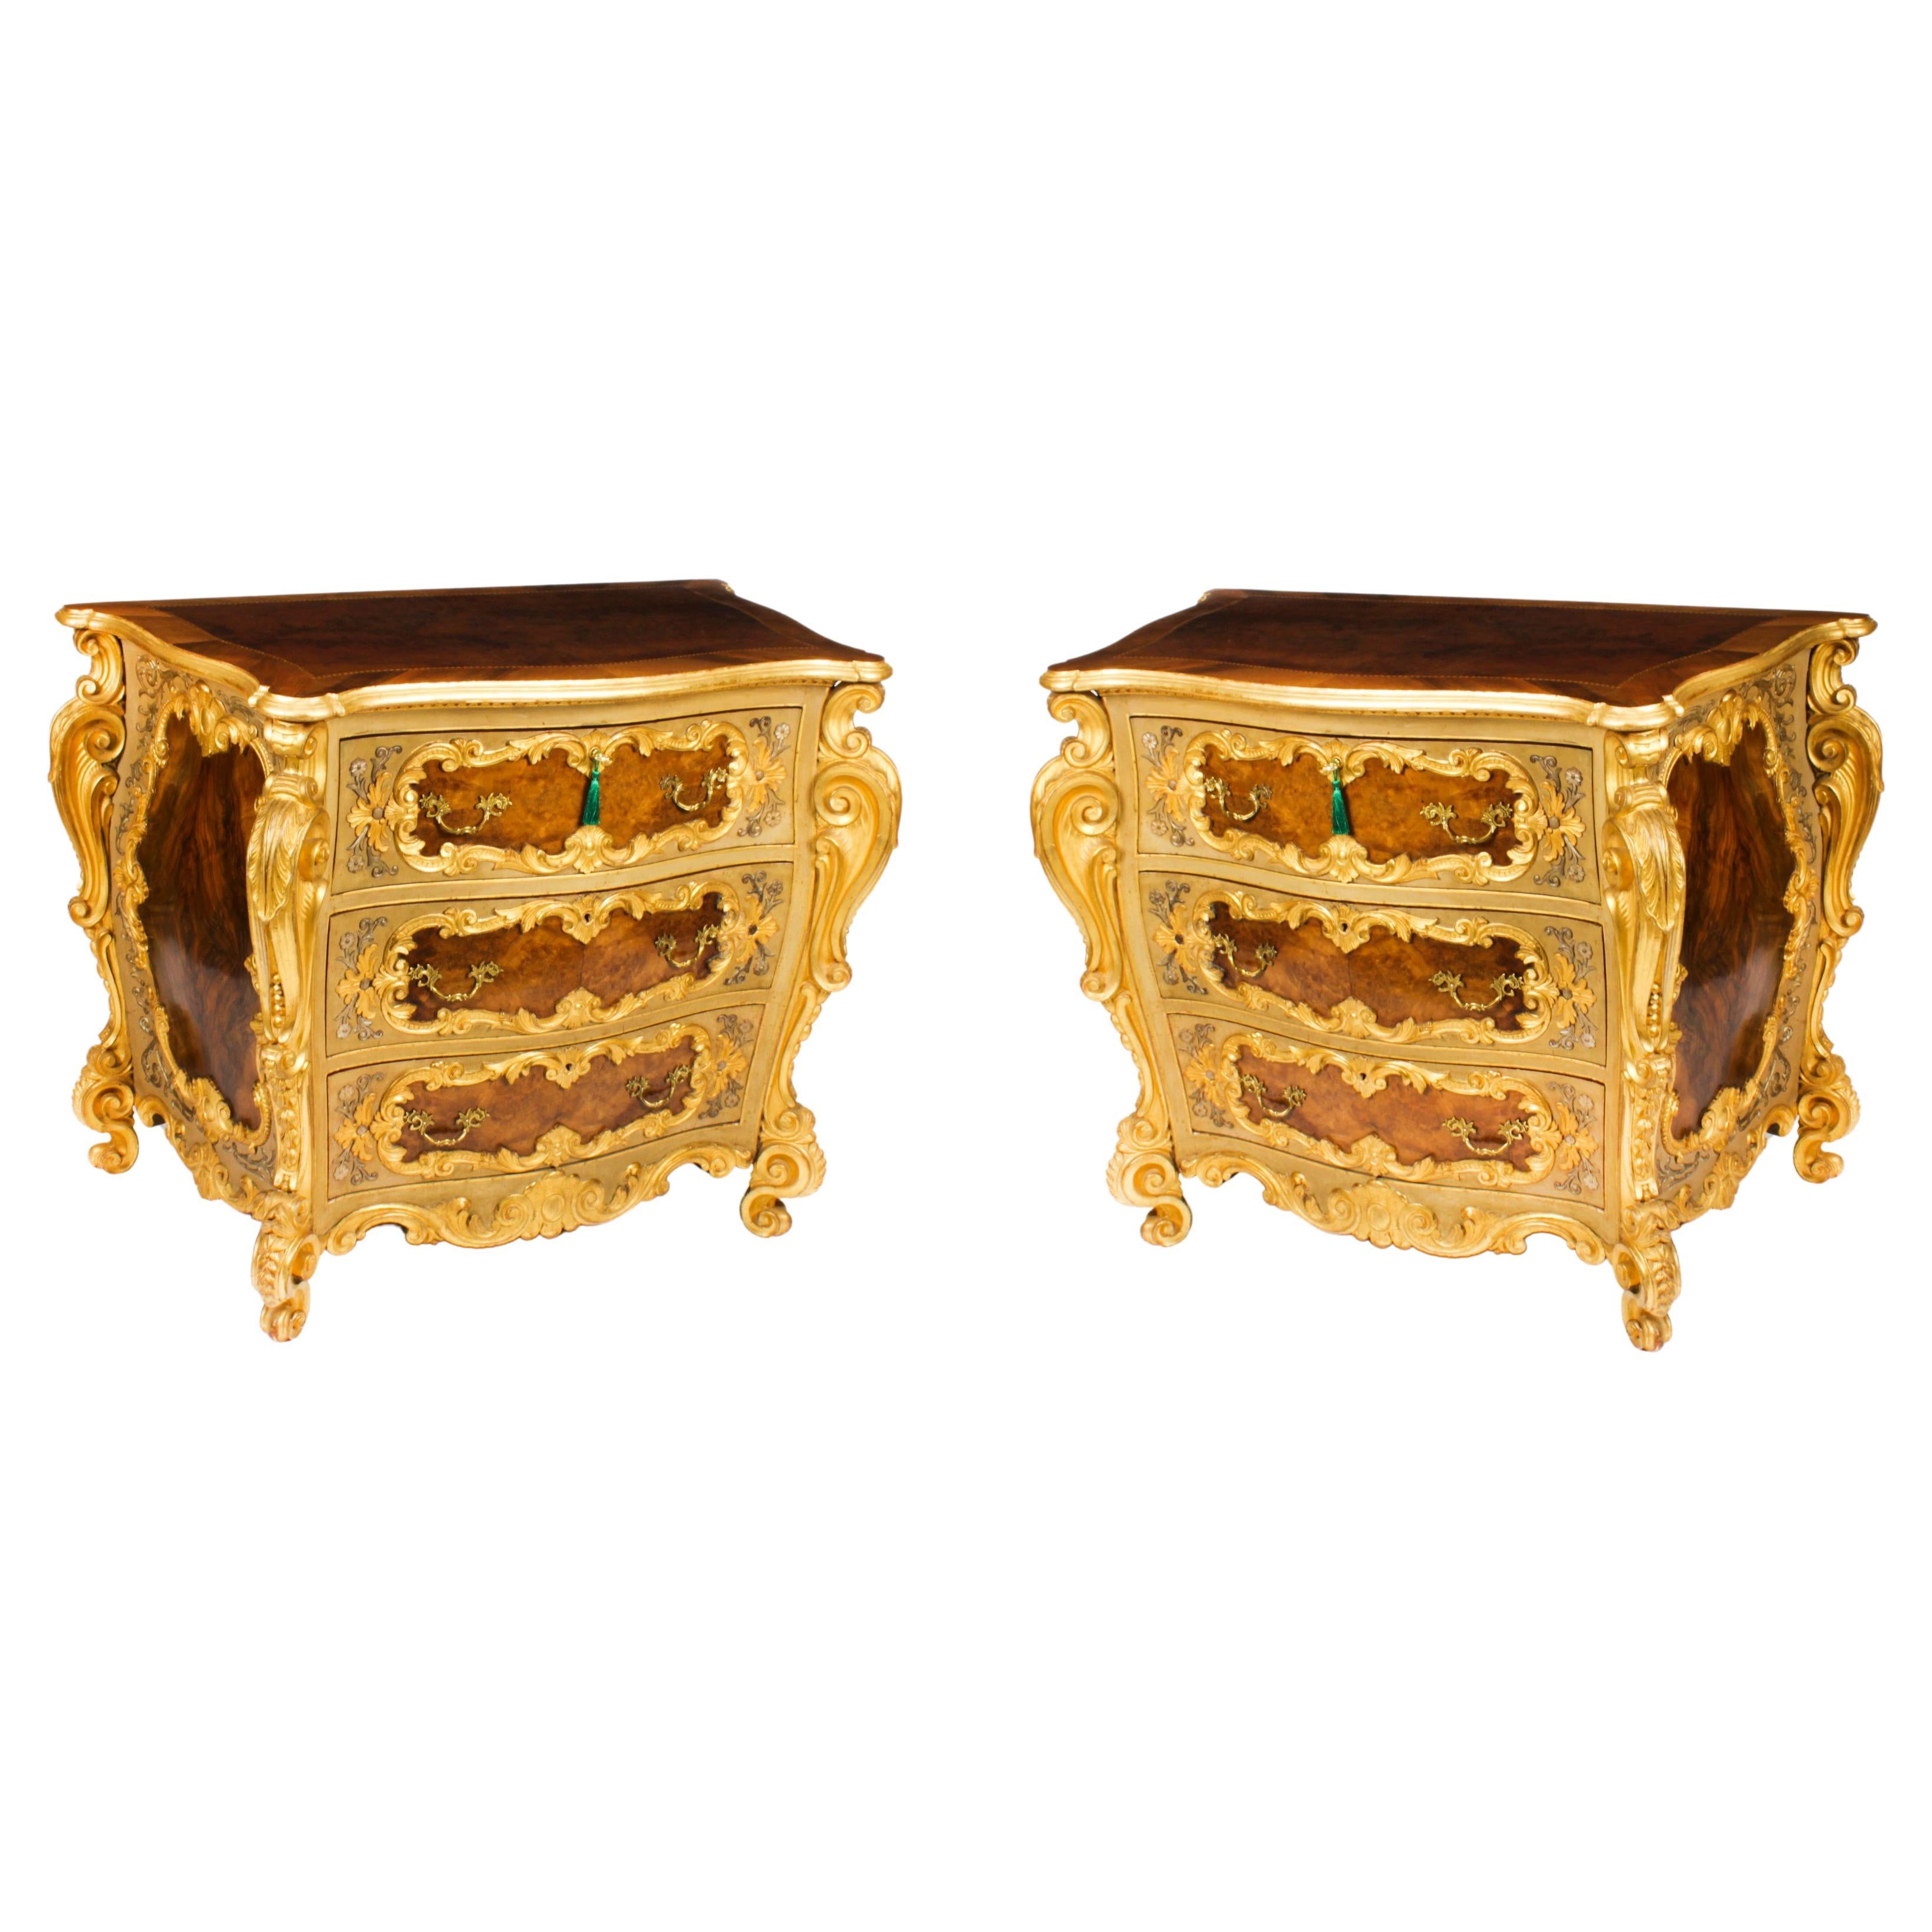 Antique Pair Venetian Walnut and Giltwood Commodes Chests 19th C For Sale